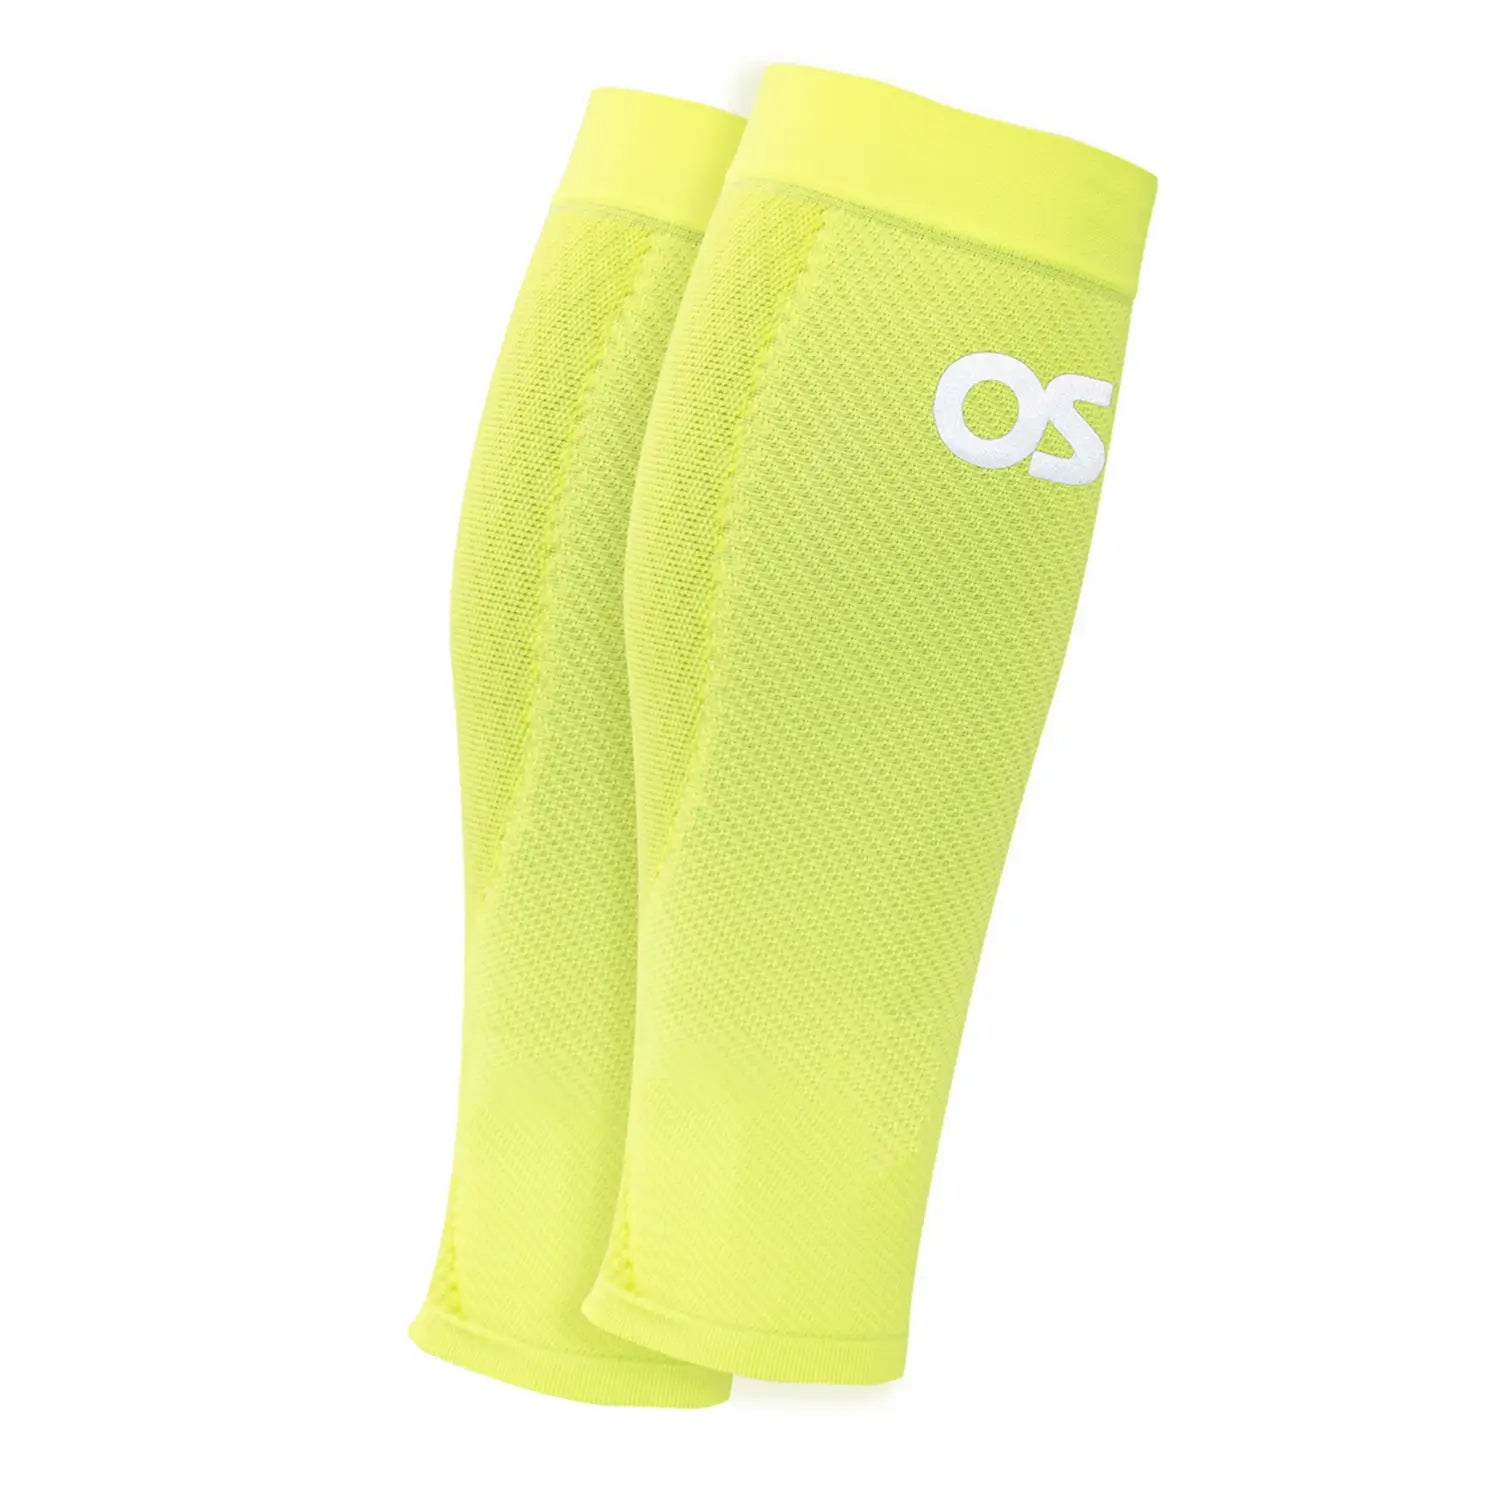 CS6 Calf Compression Sleeves For Lower Leg Pain &amp; Swelling